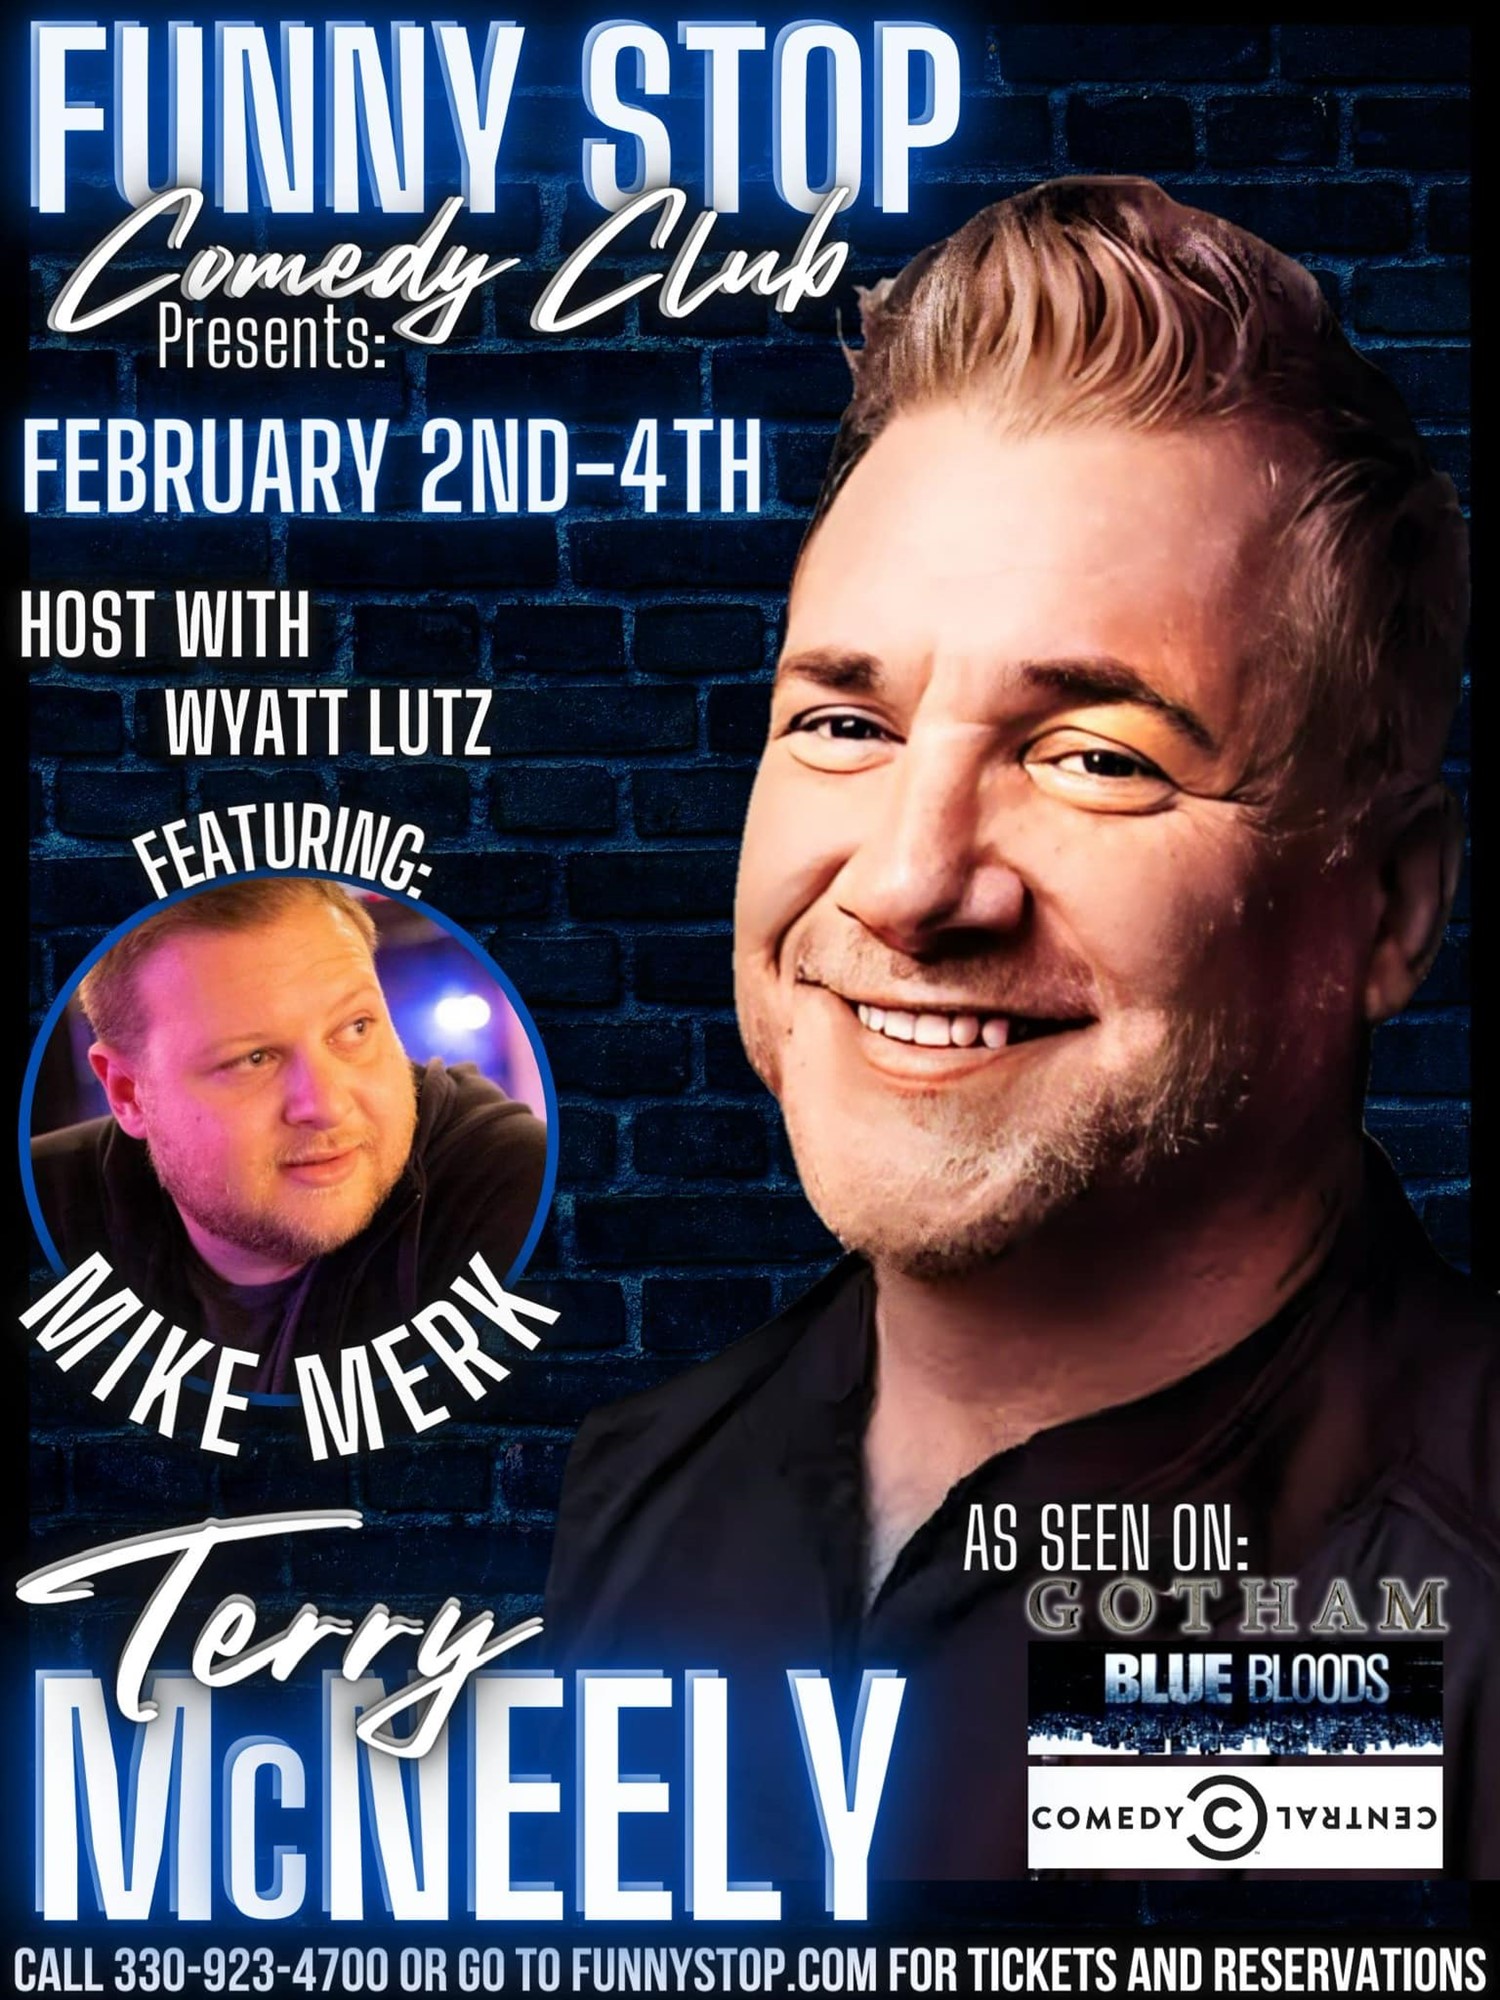 Terry McNeely and Mike Merk Show Sat. at 7:30PM Funny Stop Comedy Club on Feb 04, 19:30@Funny Stop Comedy Club - Buy tickets and Get information on Funny Stop funnystop.online